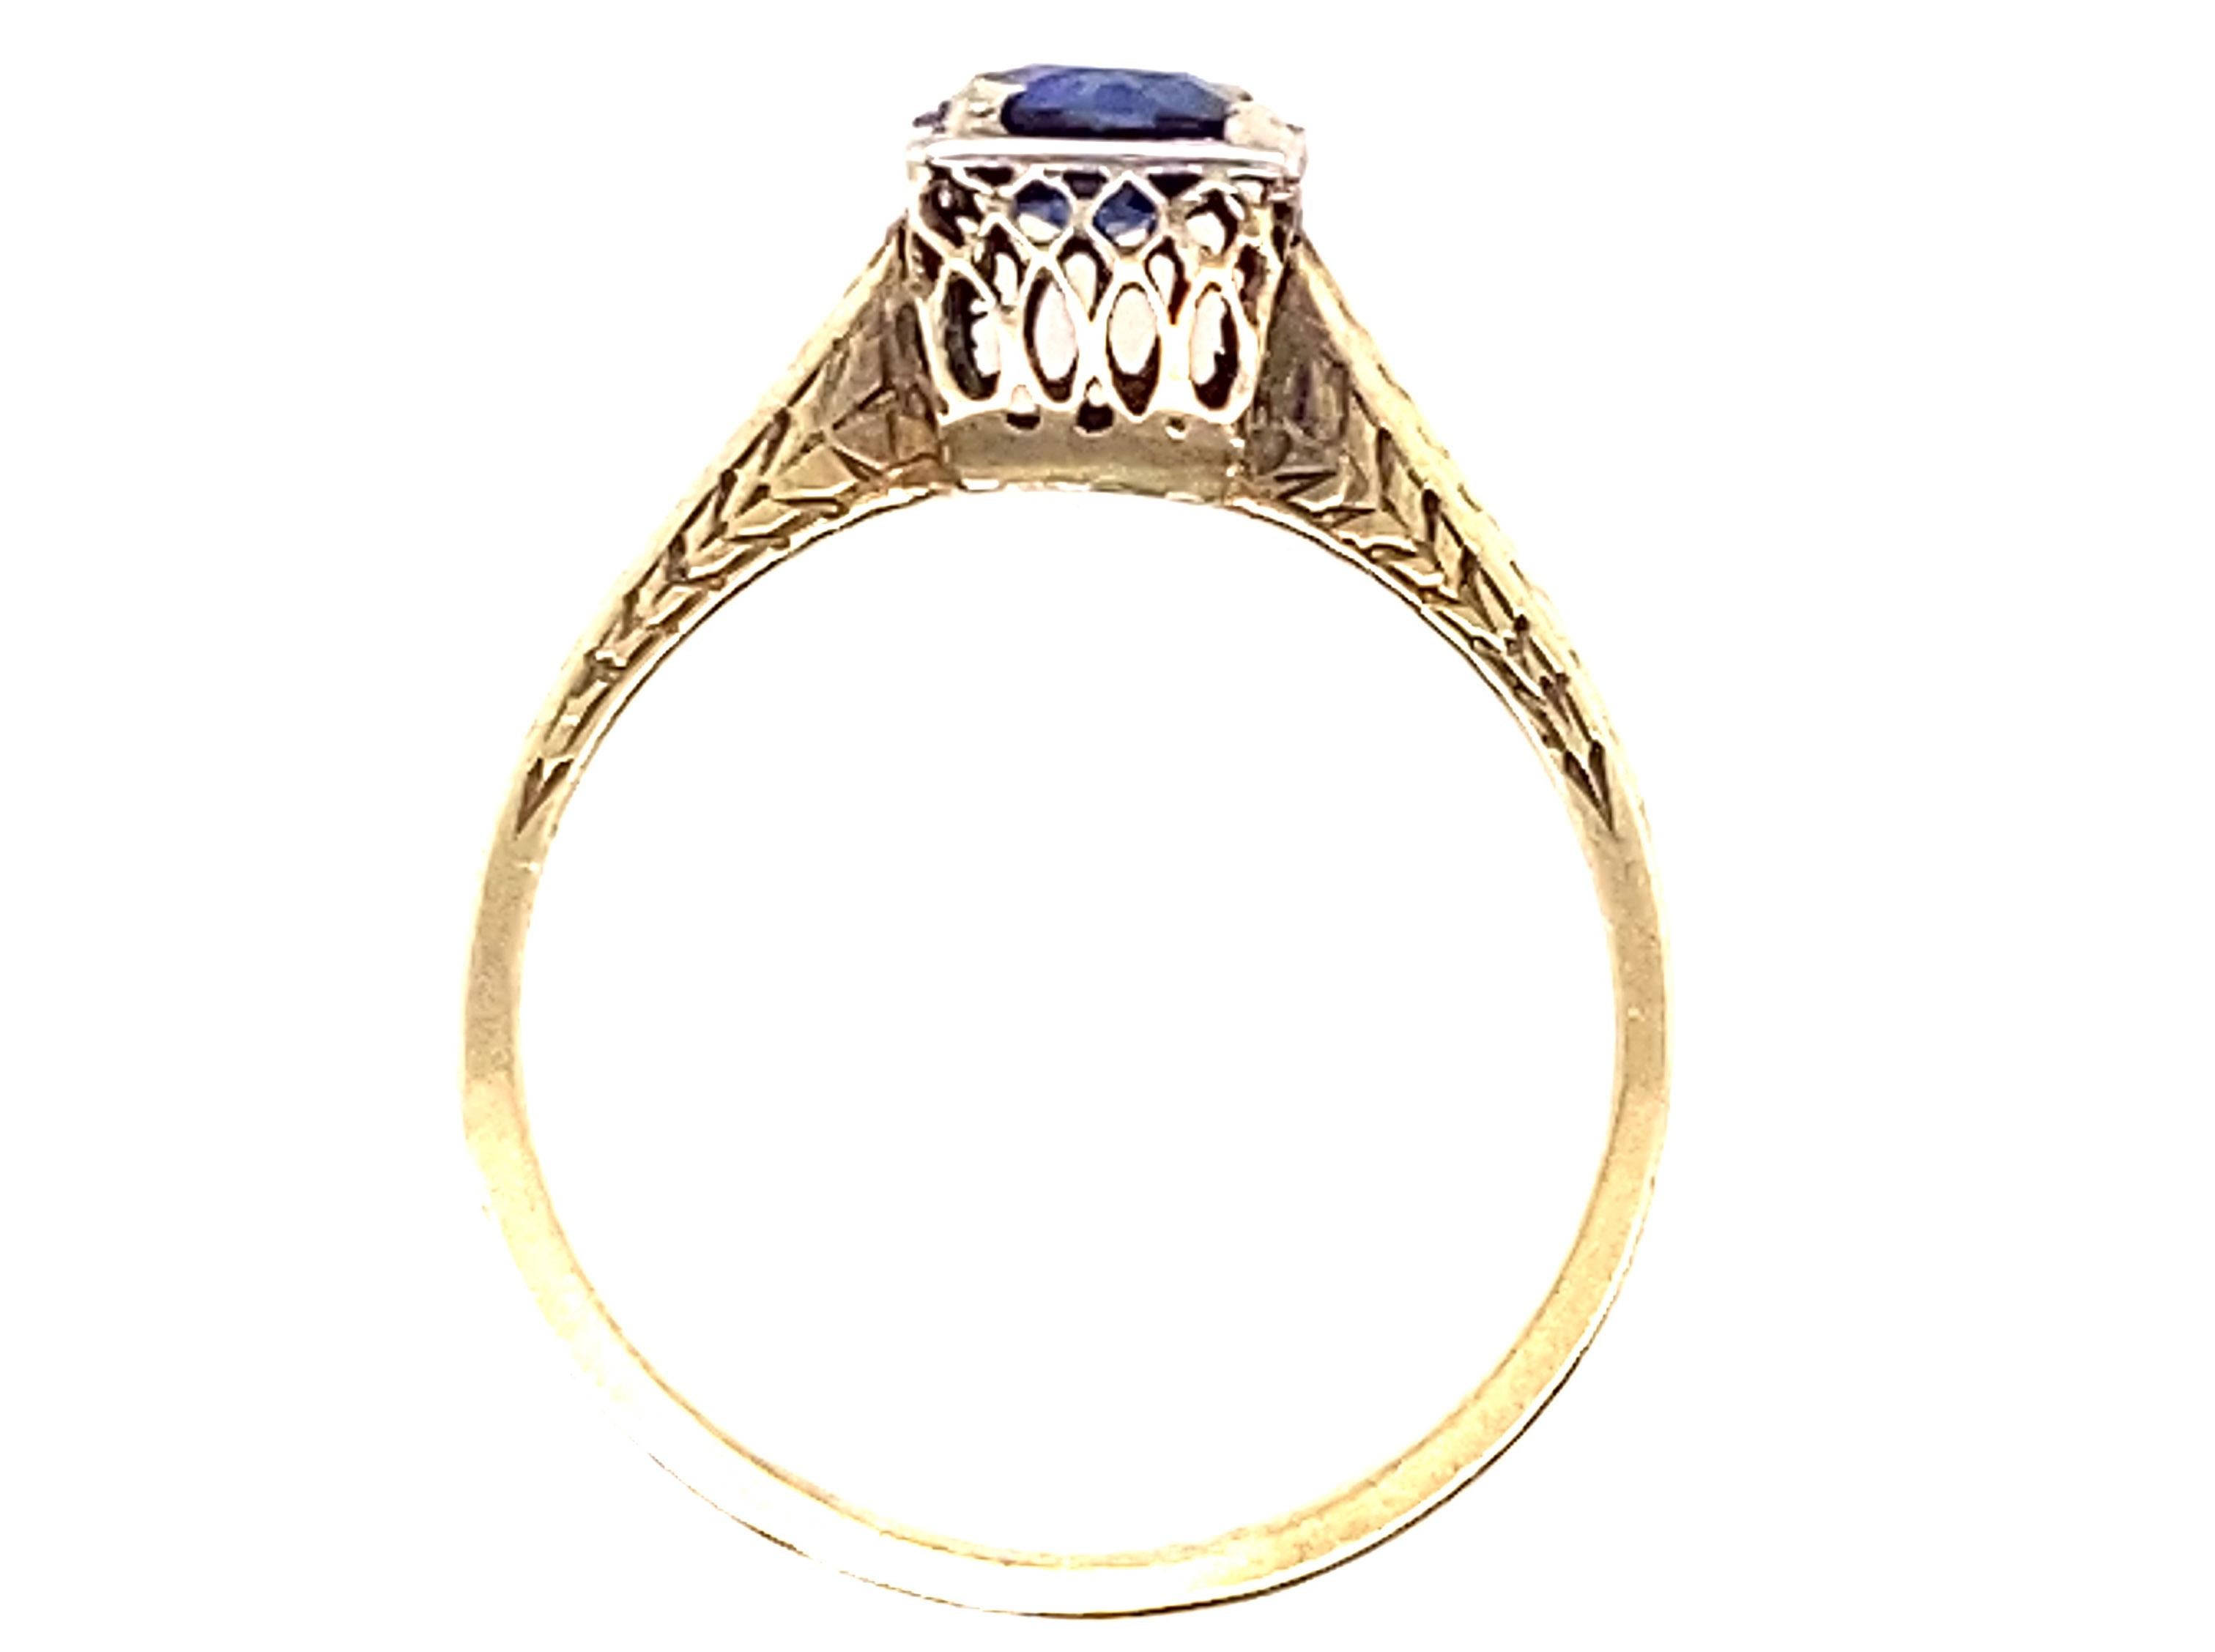 Genuine Original Antique from 1920's-1930's Sapphire Engagement Ring .65ct 14K Yellow Gold Art Deco 


Featuring a Gorgeous Natural Round Cut Center Blue Sapphire

100% Natural Sapphire

Beautifully Patterned Filigree on Each Side

Pierced and